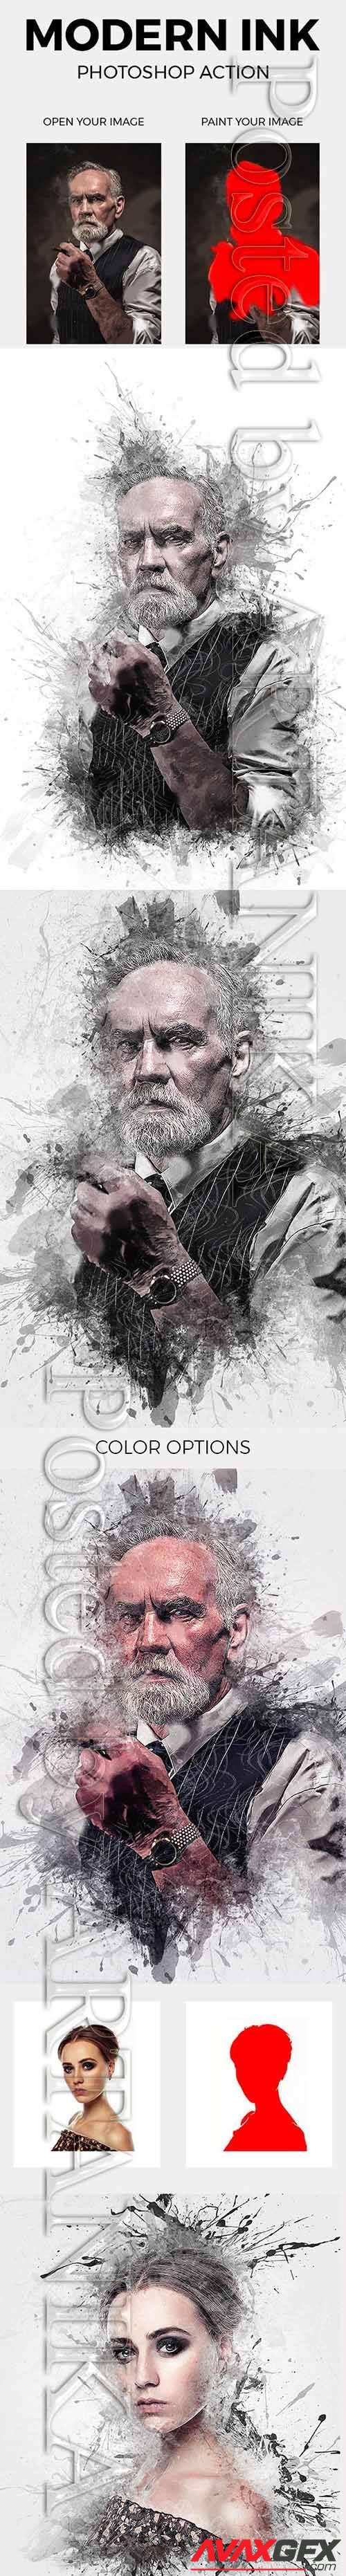 GraphicRiver - Modern Ink Photoshop Action 21169470